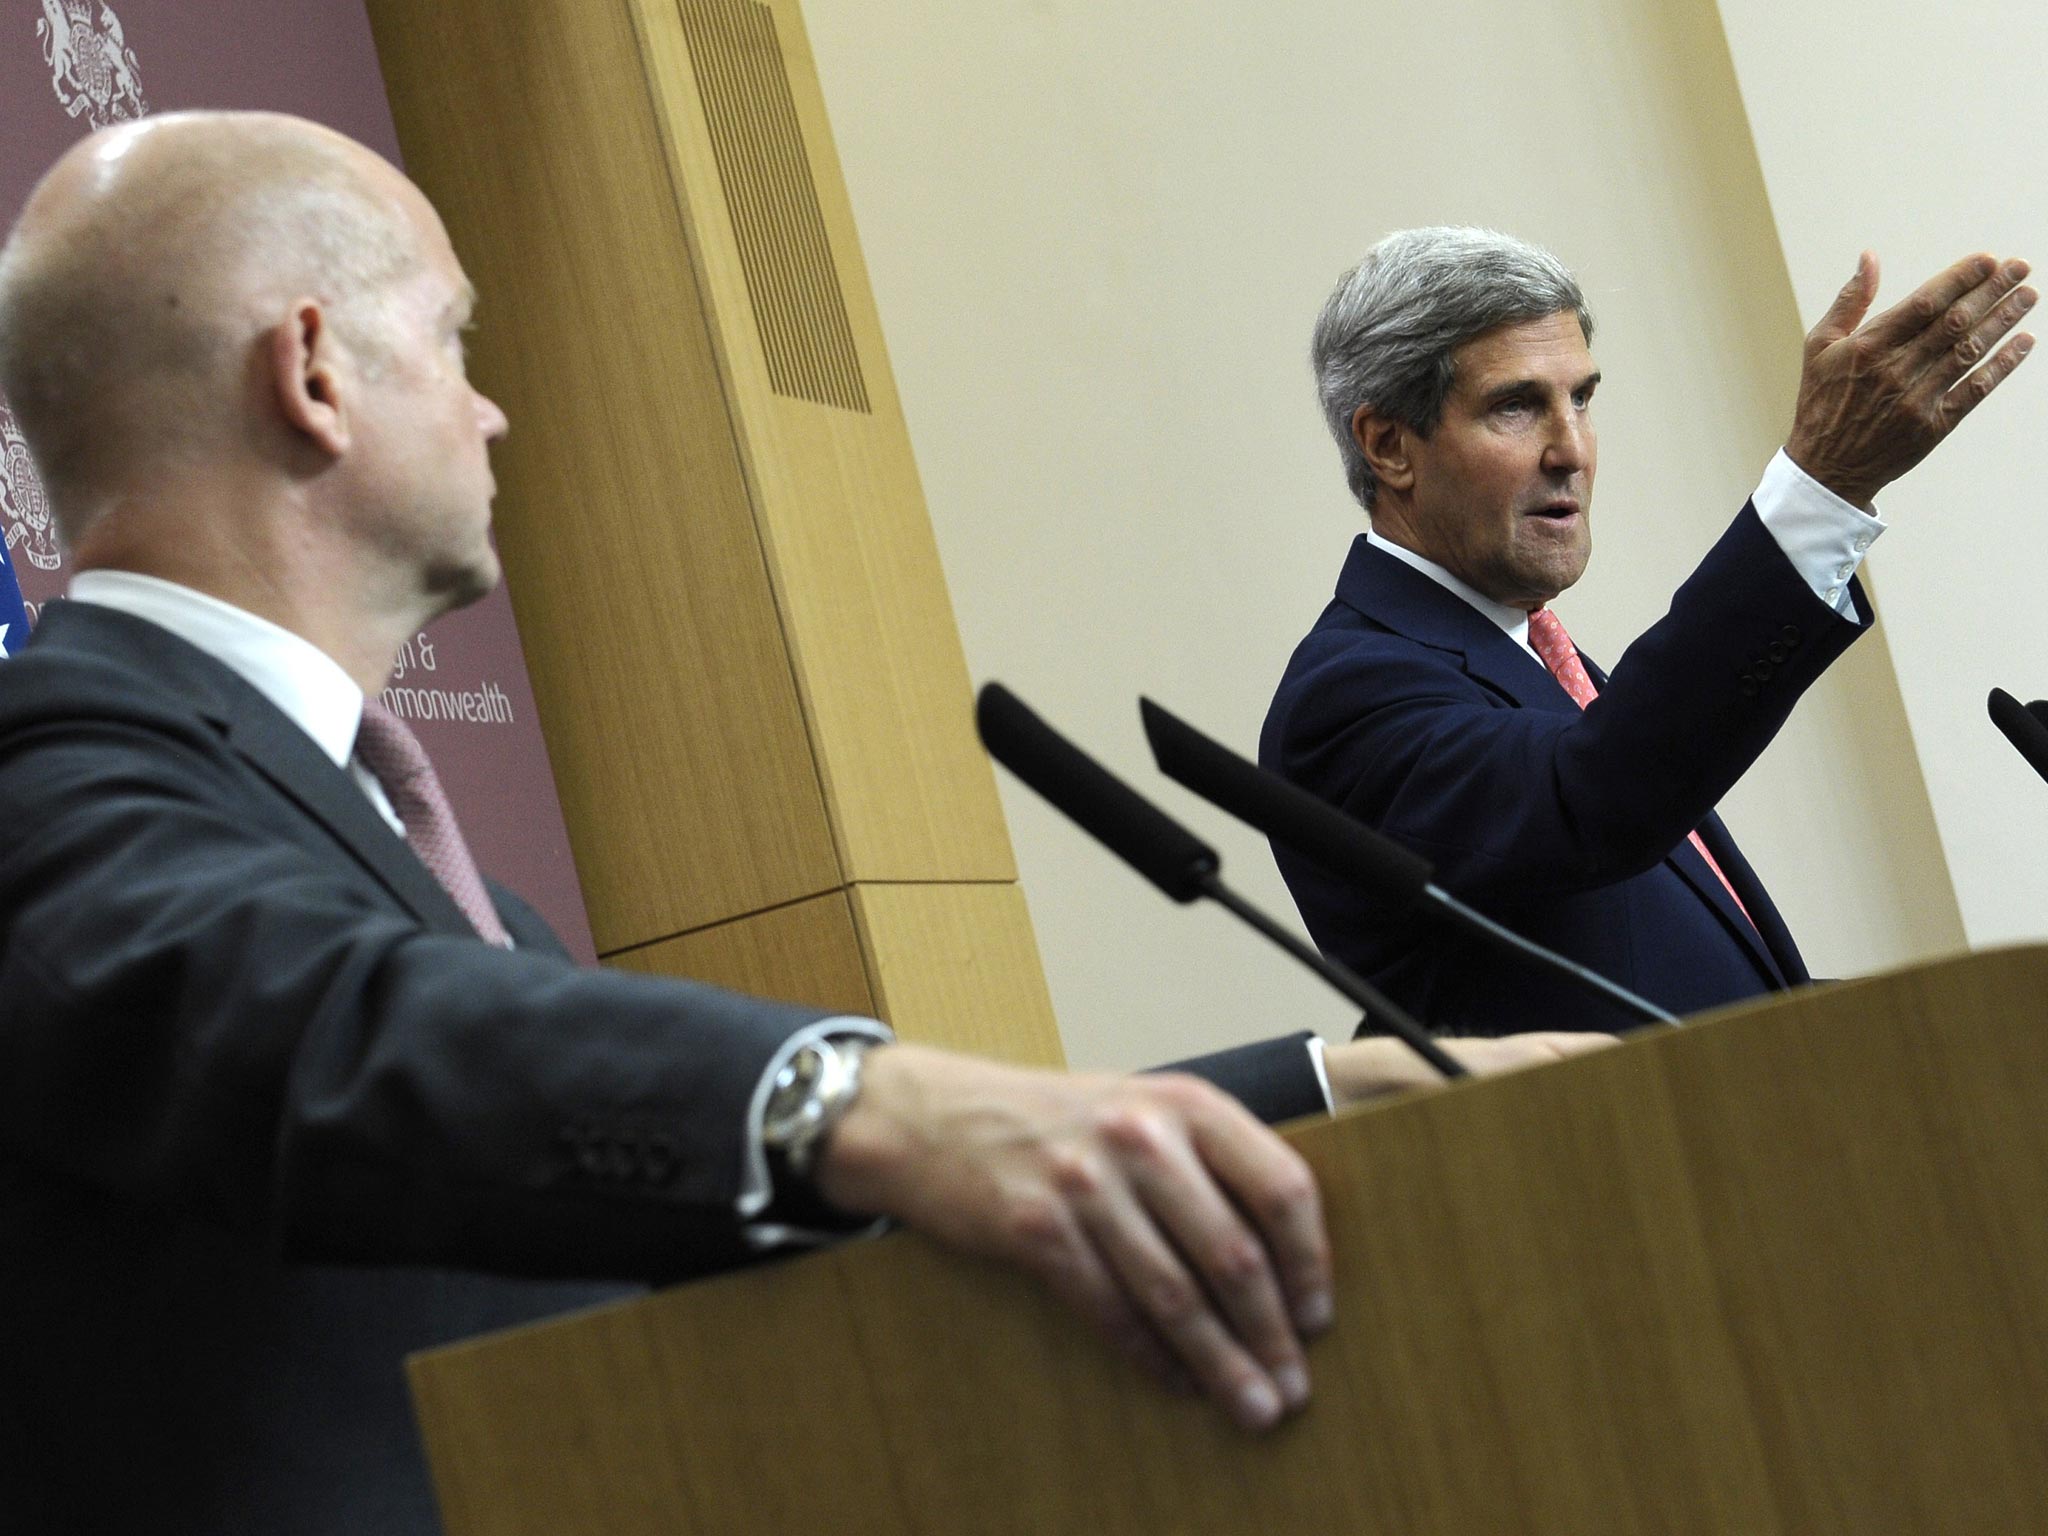 US Secretary of State John Kerry, right, speaks as Britain's Foreign Minister William Hague, left, listens during a news conference at the Foreign and Commonwealth Office in London